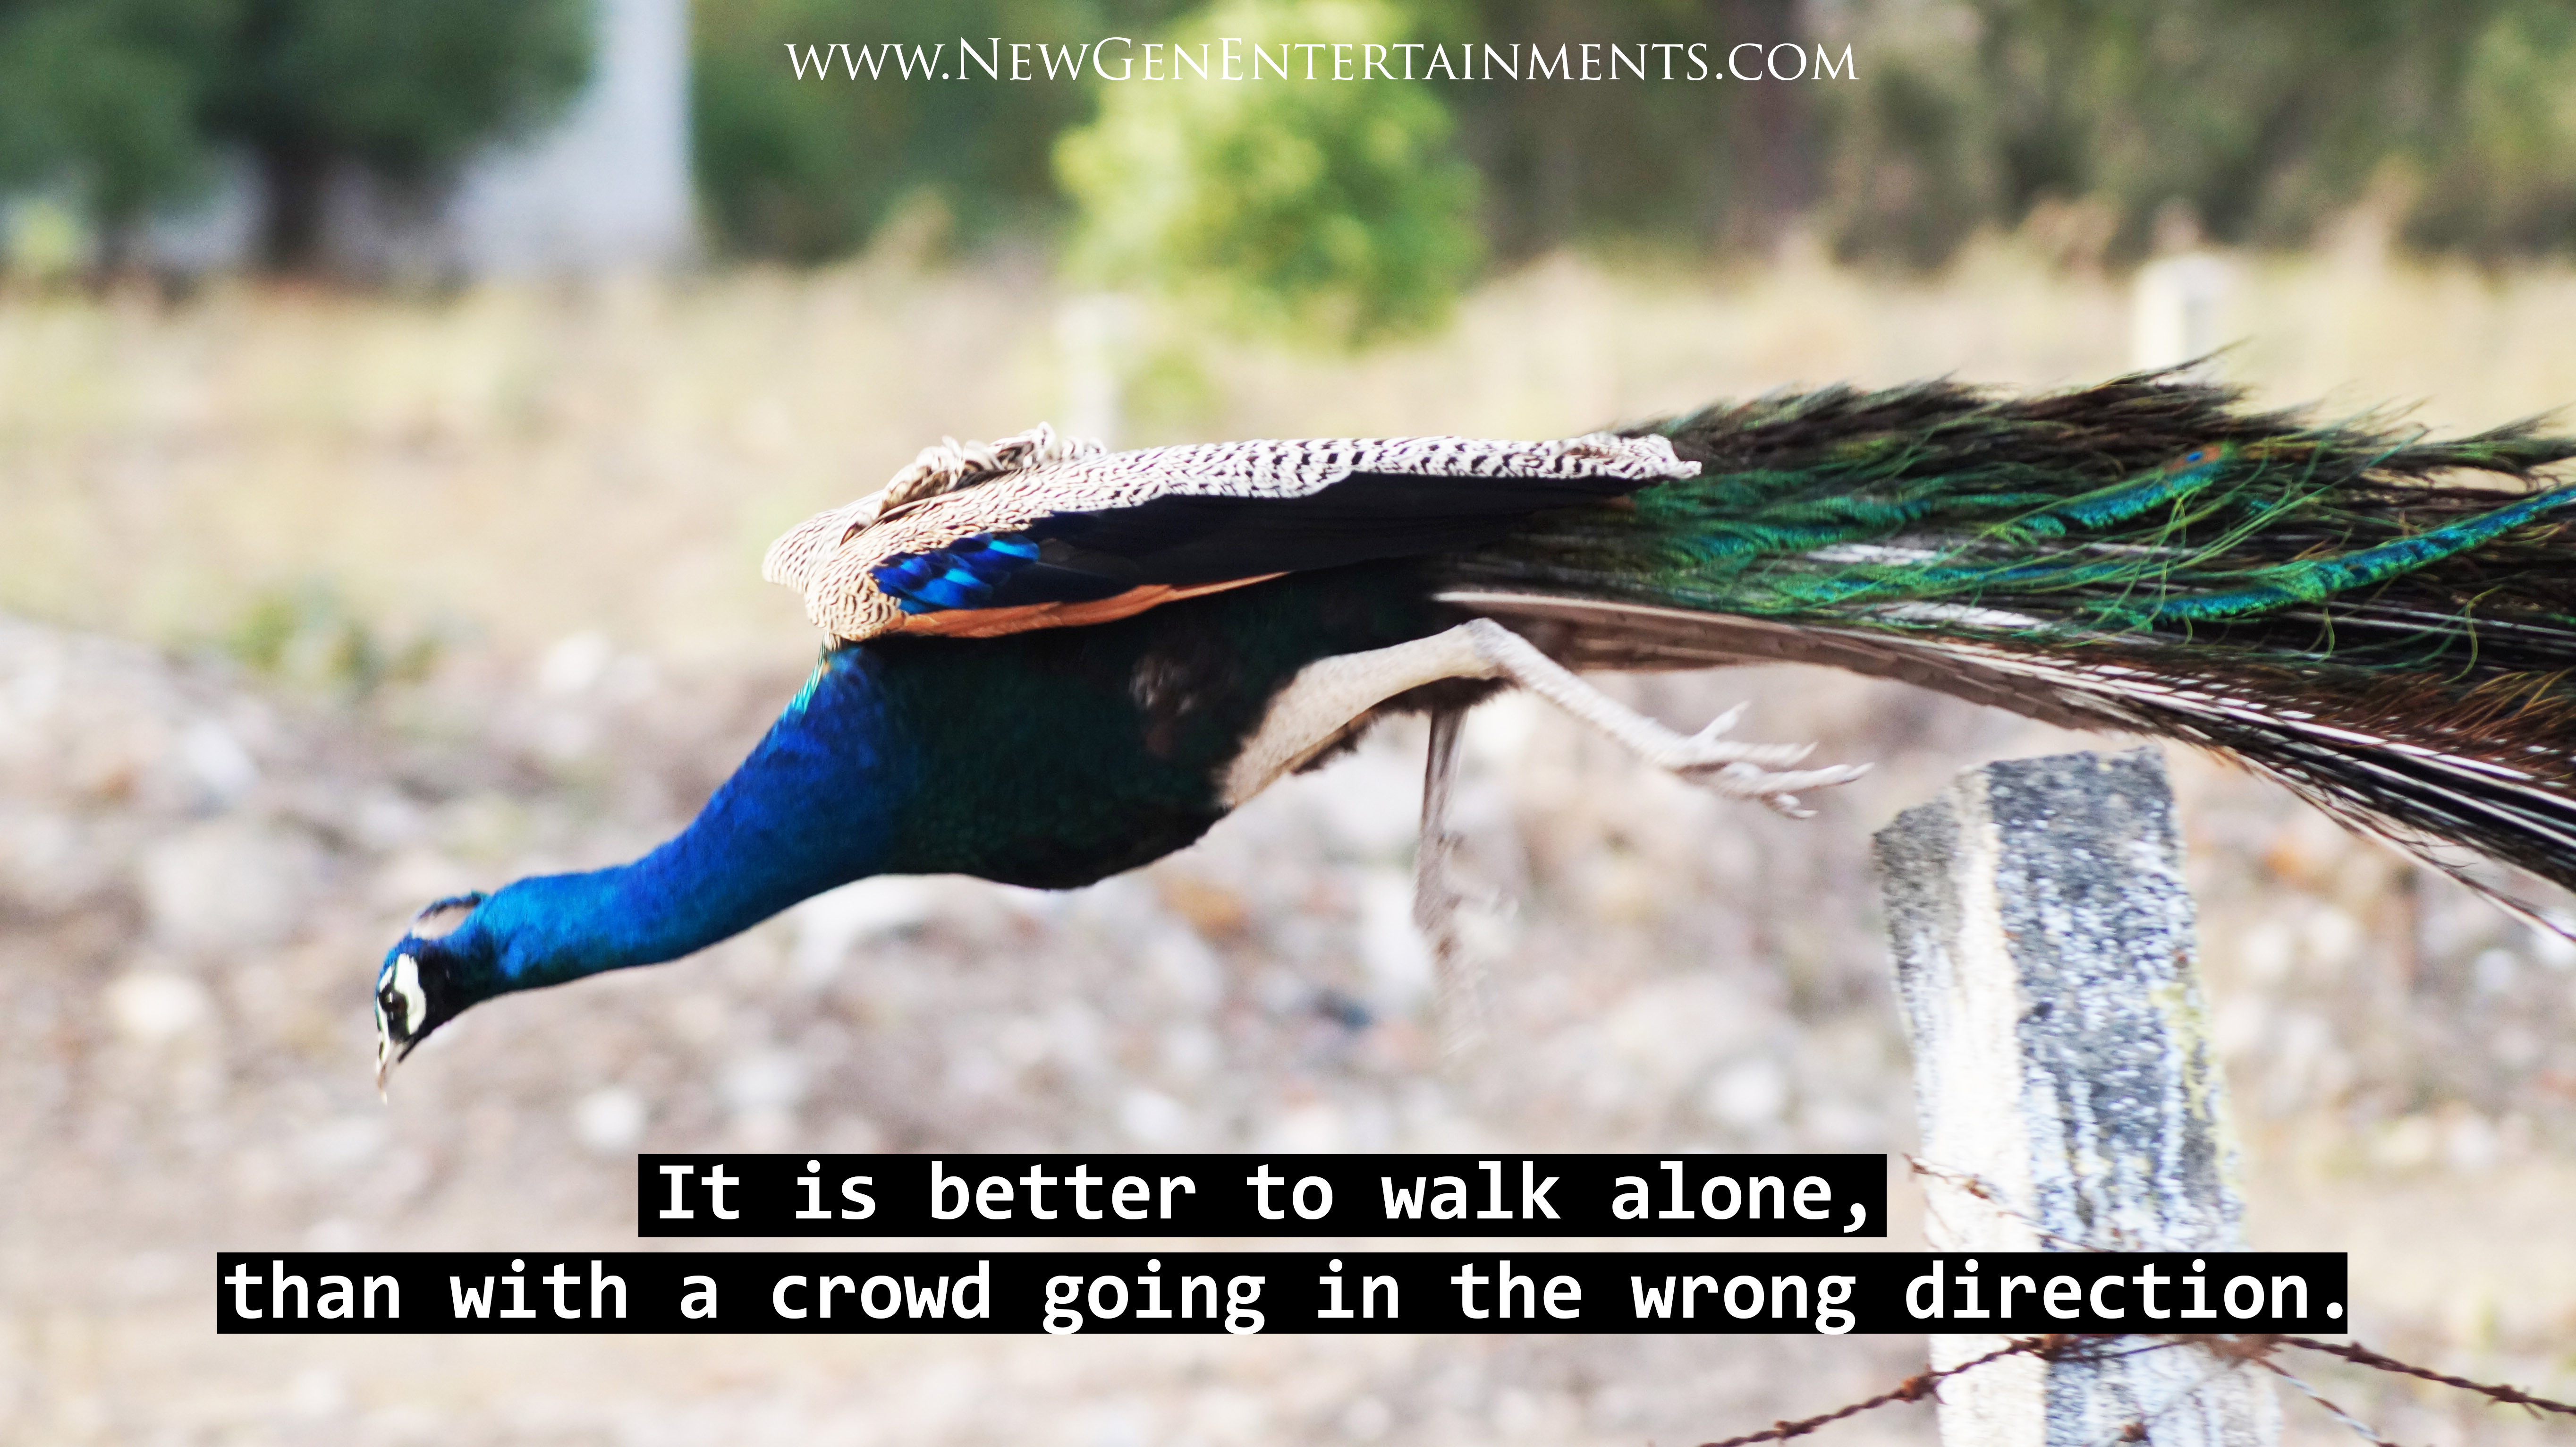 It is better to walk alone, than with a crowd going in the wrong direction